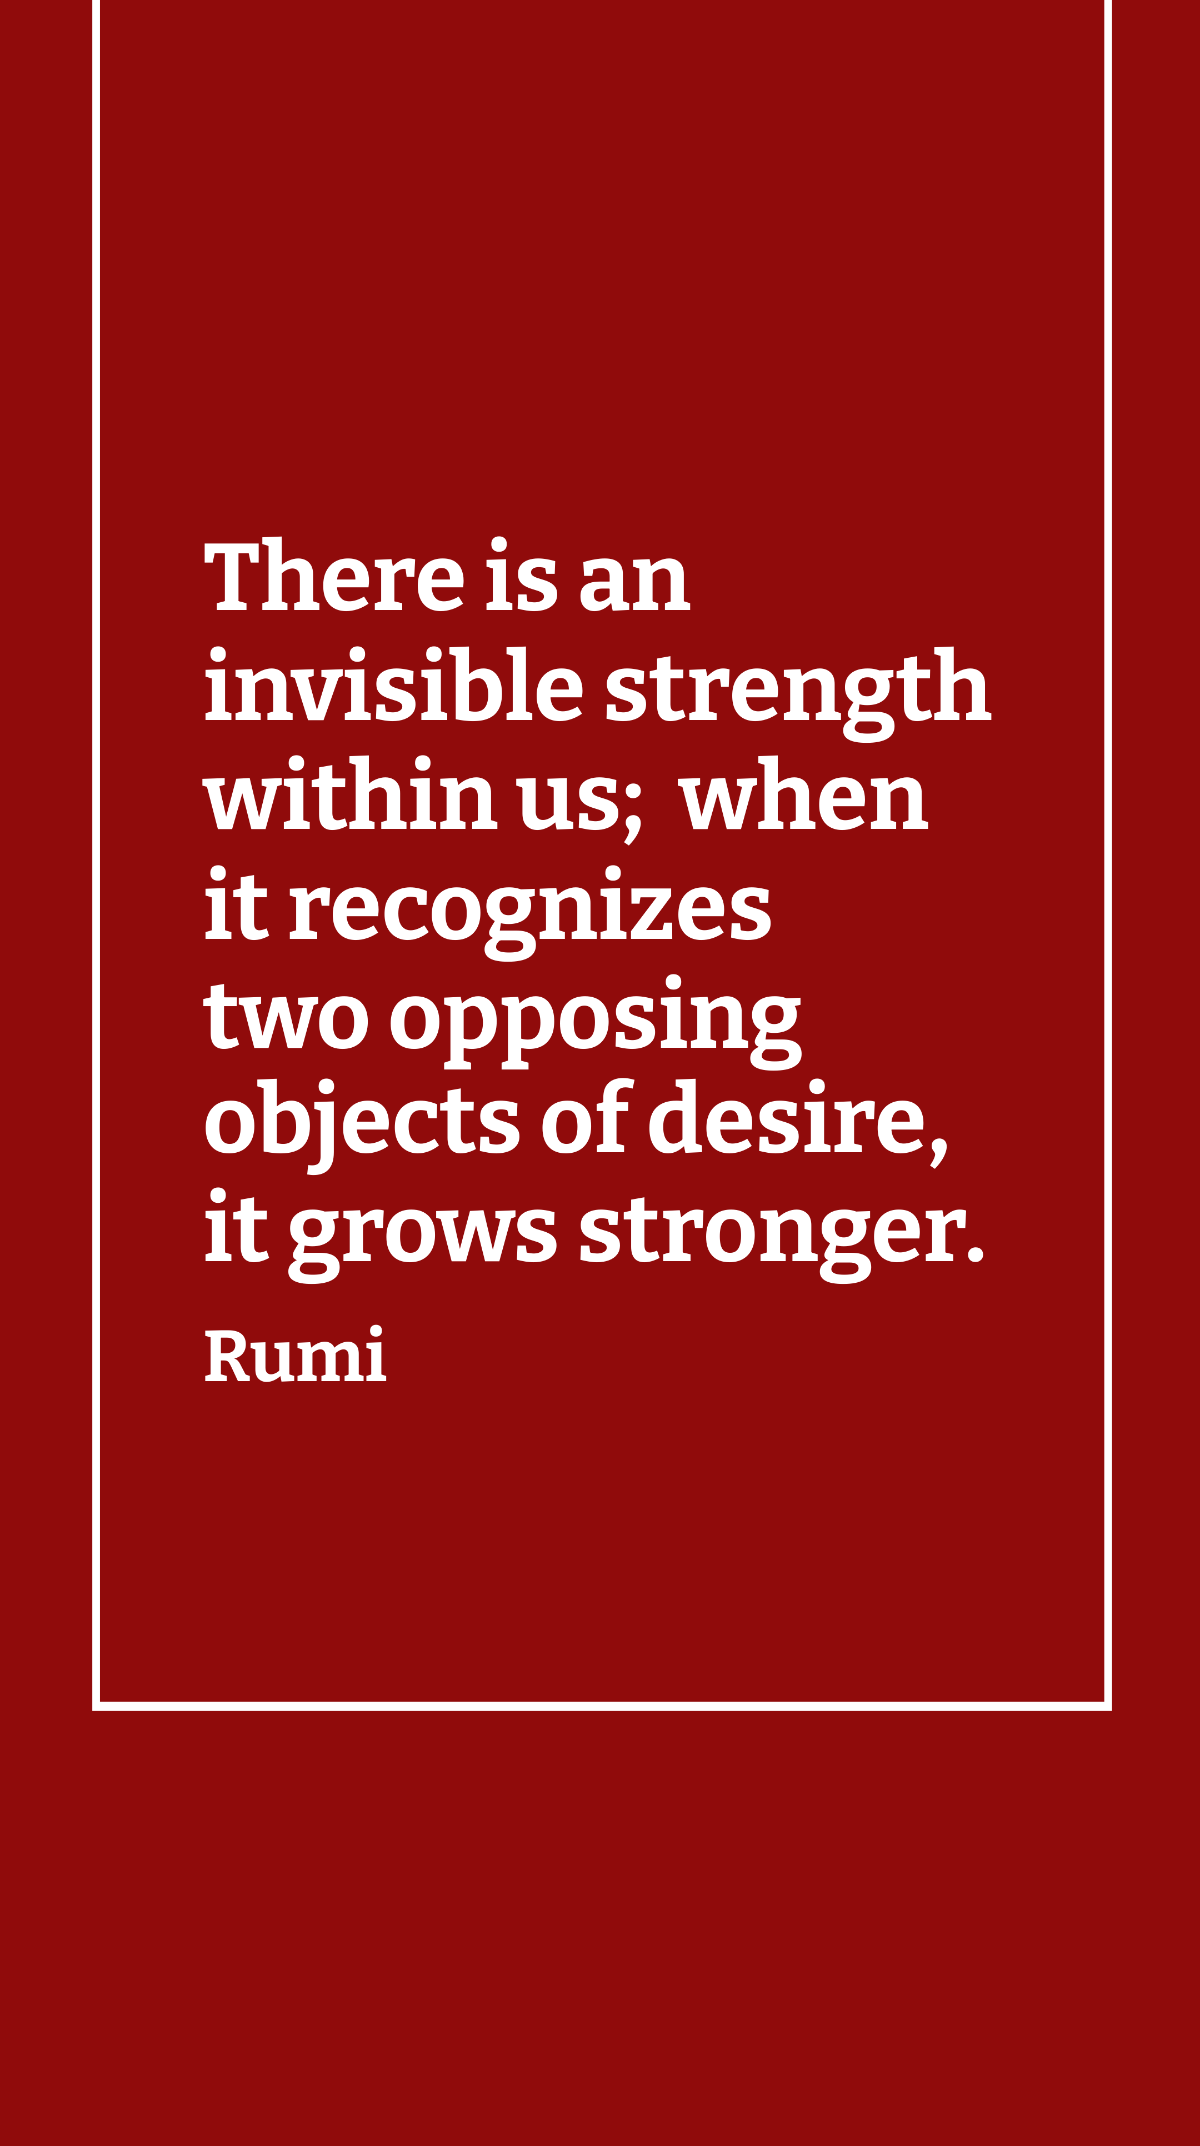 Rumi - There is an invisible strength within us; when it recognizes two opposing objects of desire, it grows stronger. Template